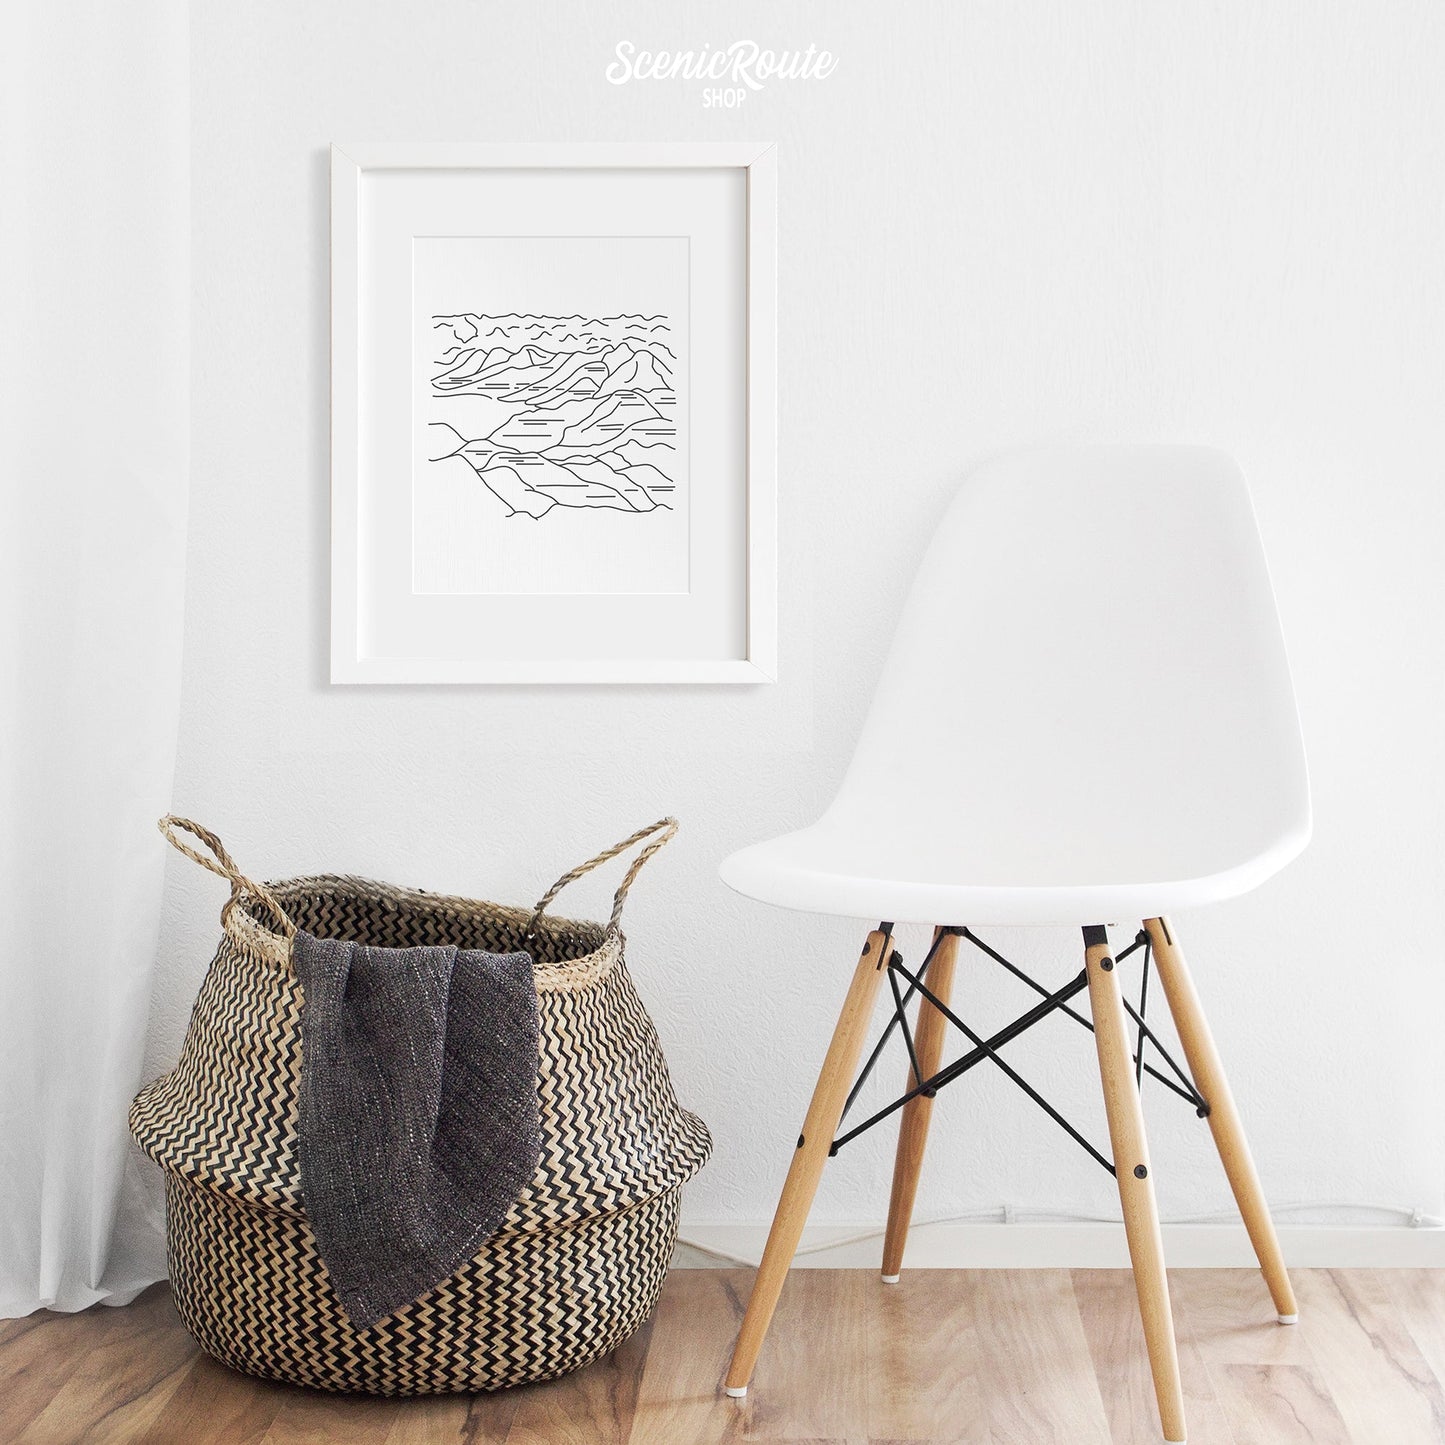 A framed line art drawing of Badlands National Park above a basket and chair